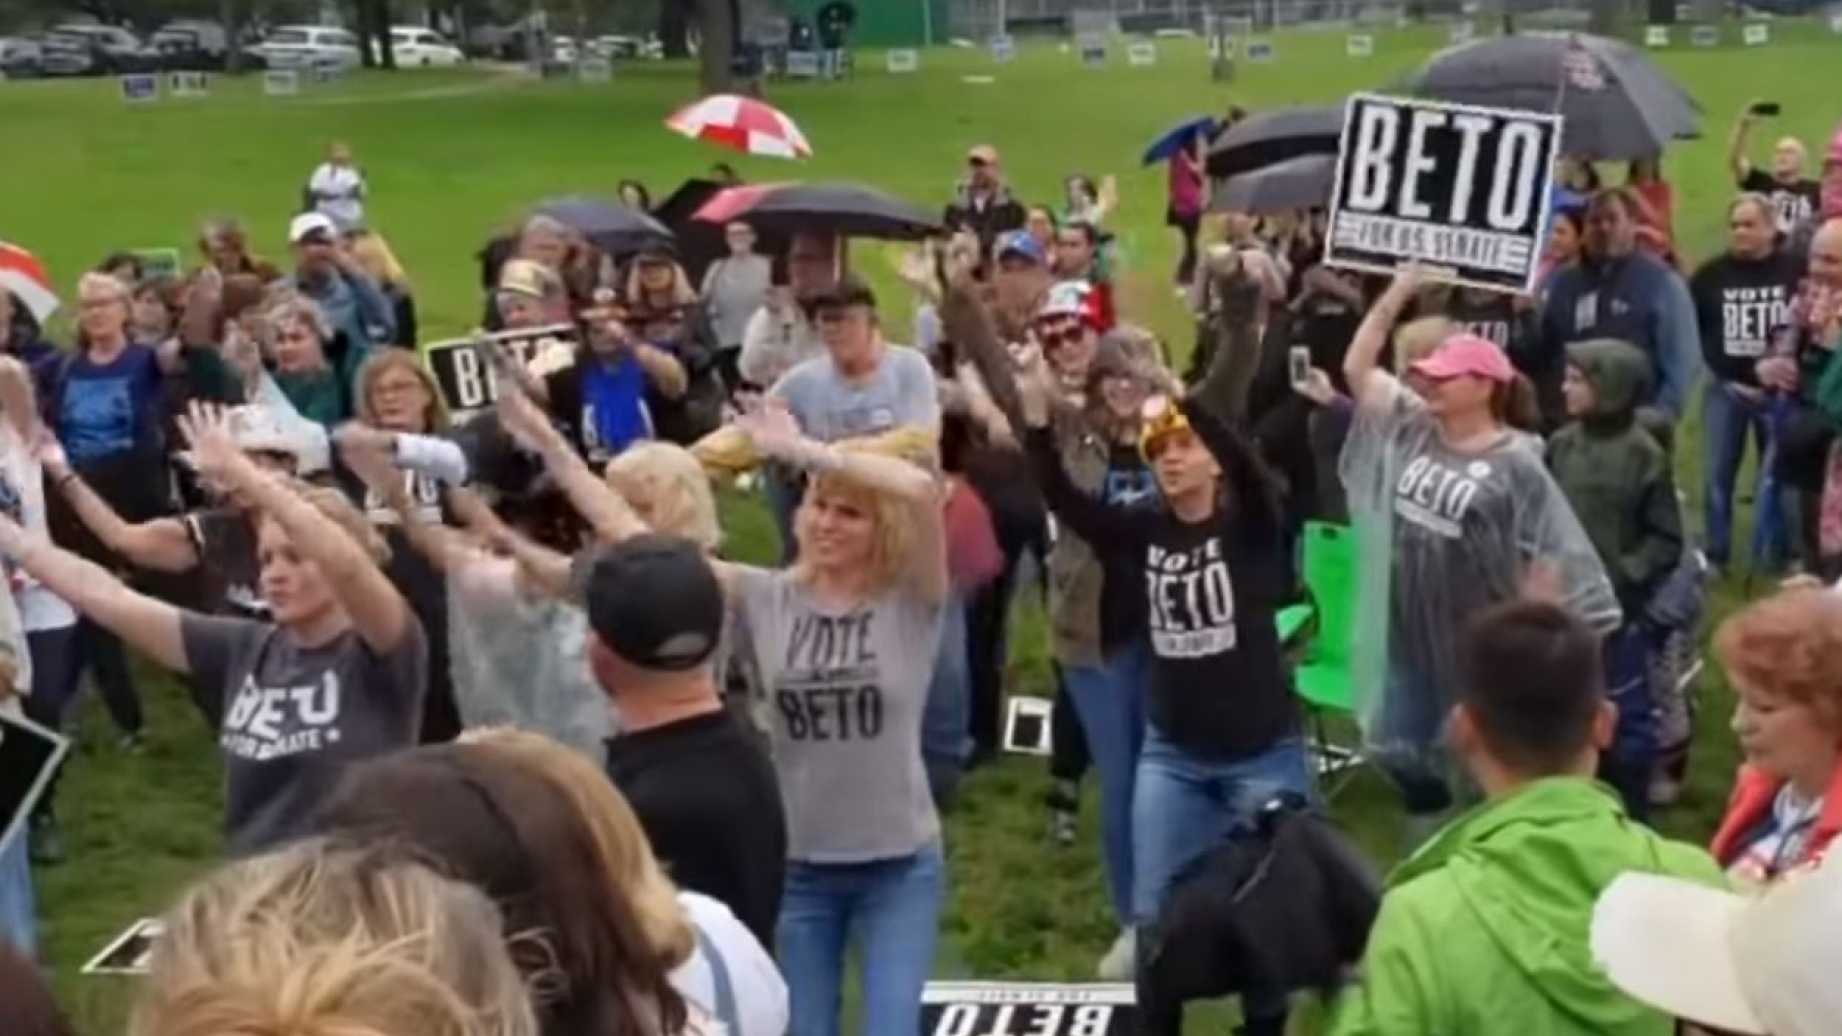 Image: Video showing “flash” mob for Beto O’Rourke features cringe-worthy liberals singing voiceover of Village People hit “YMCA”